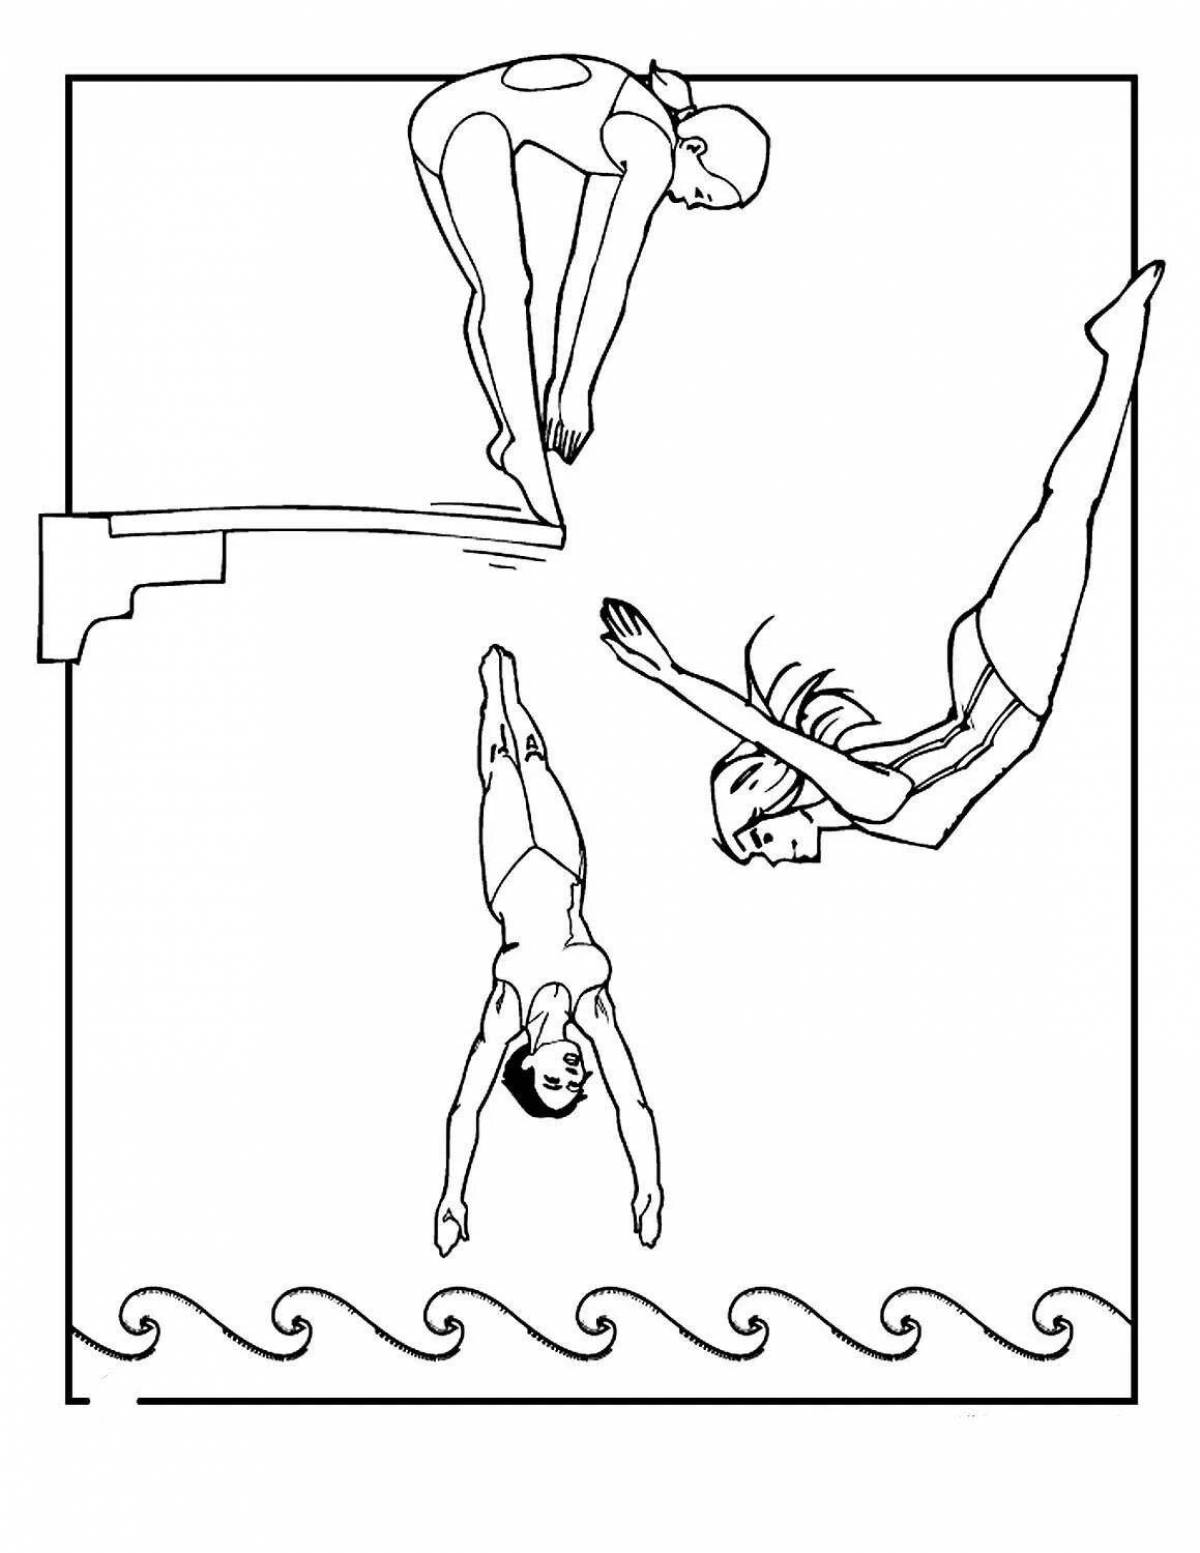 Fun synchronized swimming coloring book